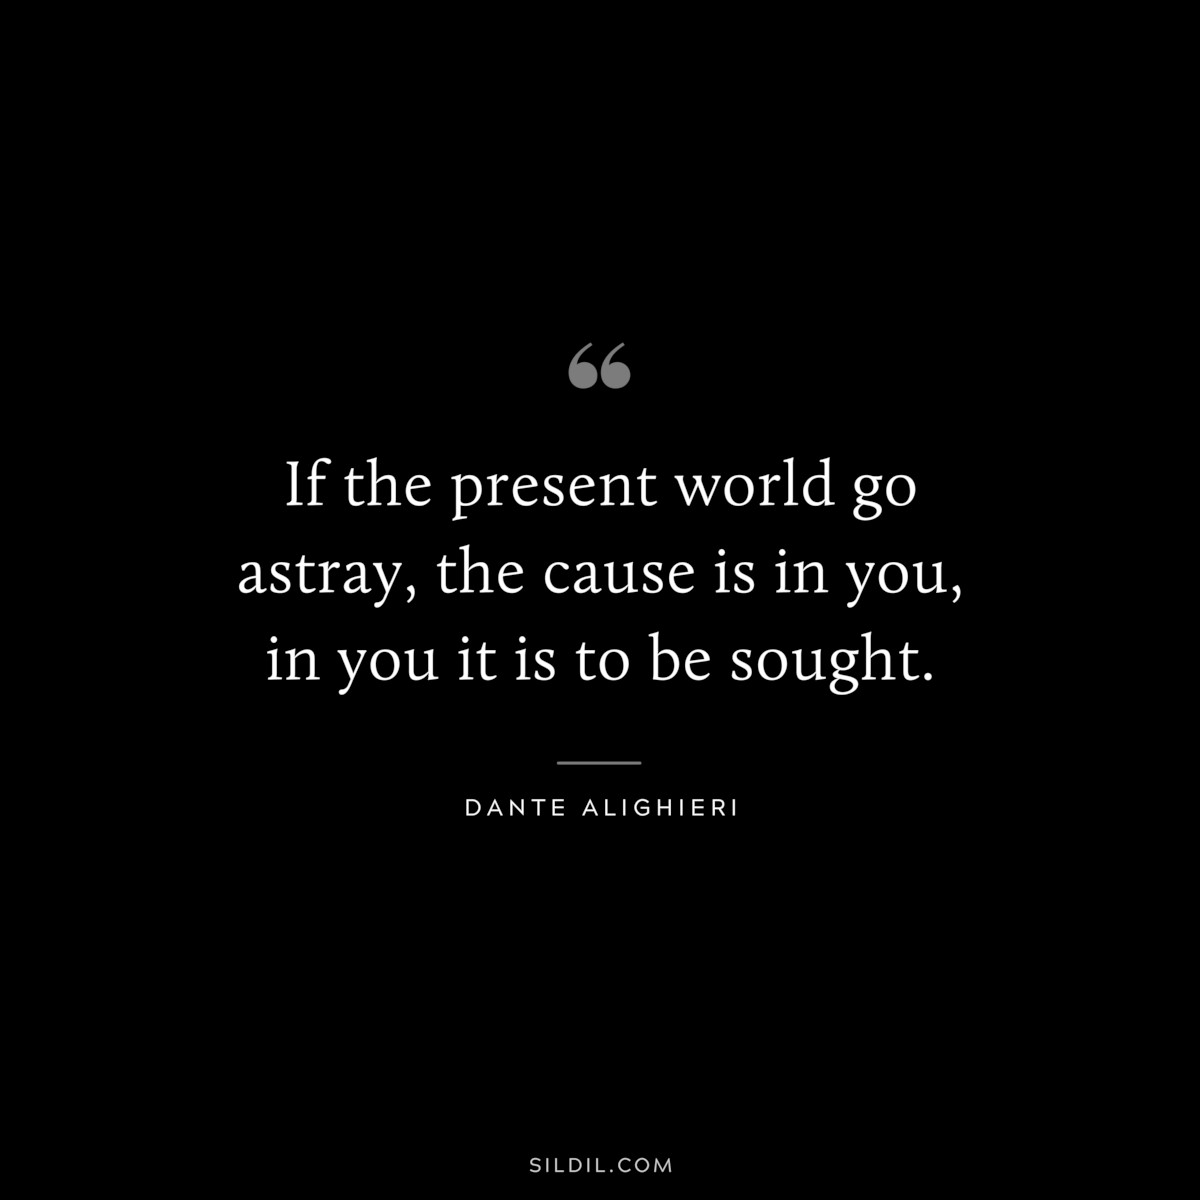 If the present world go astray, the cause is in you, in you it is to be sought. ― Dante Alighieri